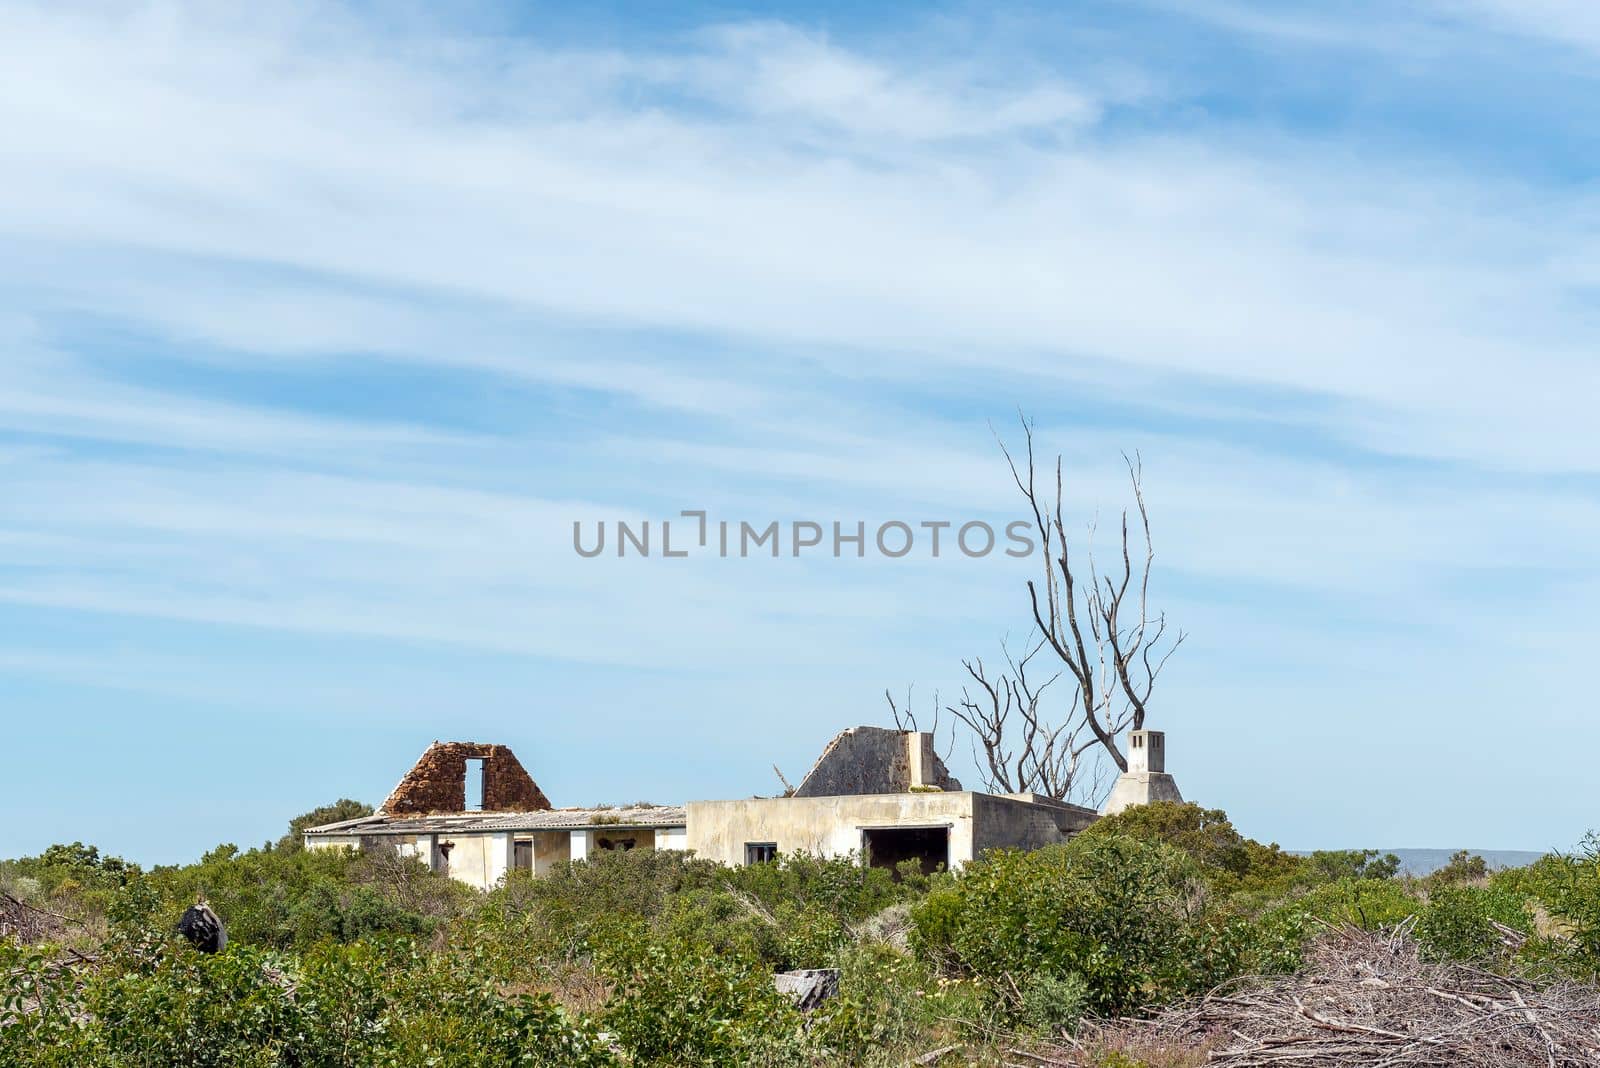 A ruin in the Agulhas National Park by dpreezg